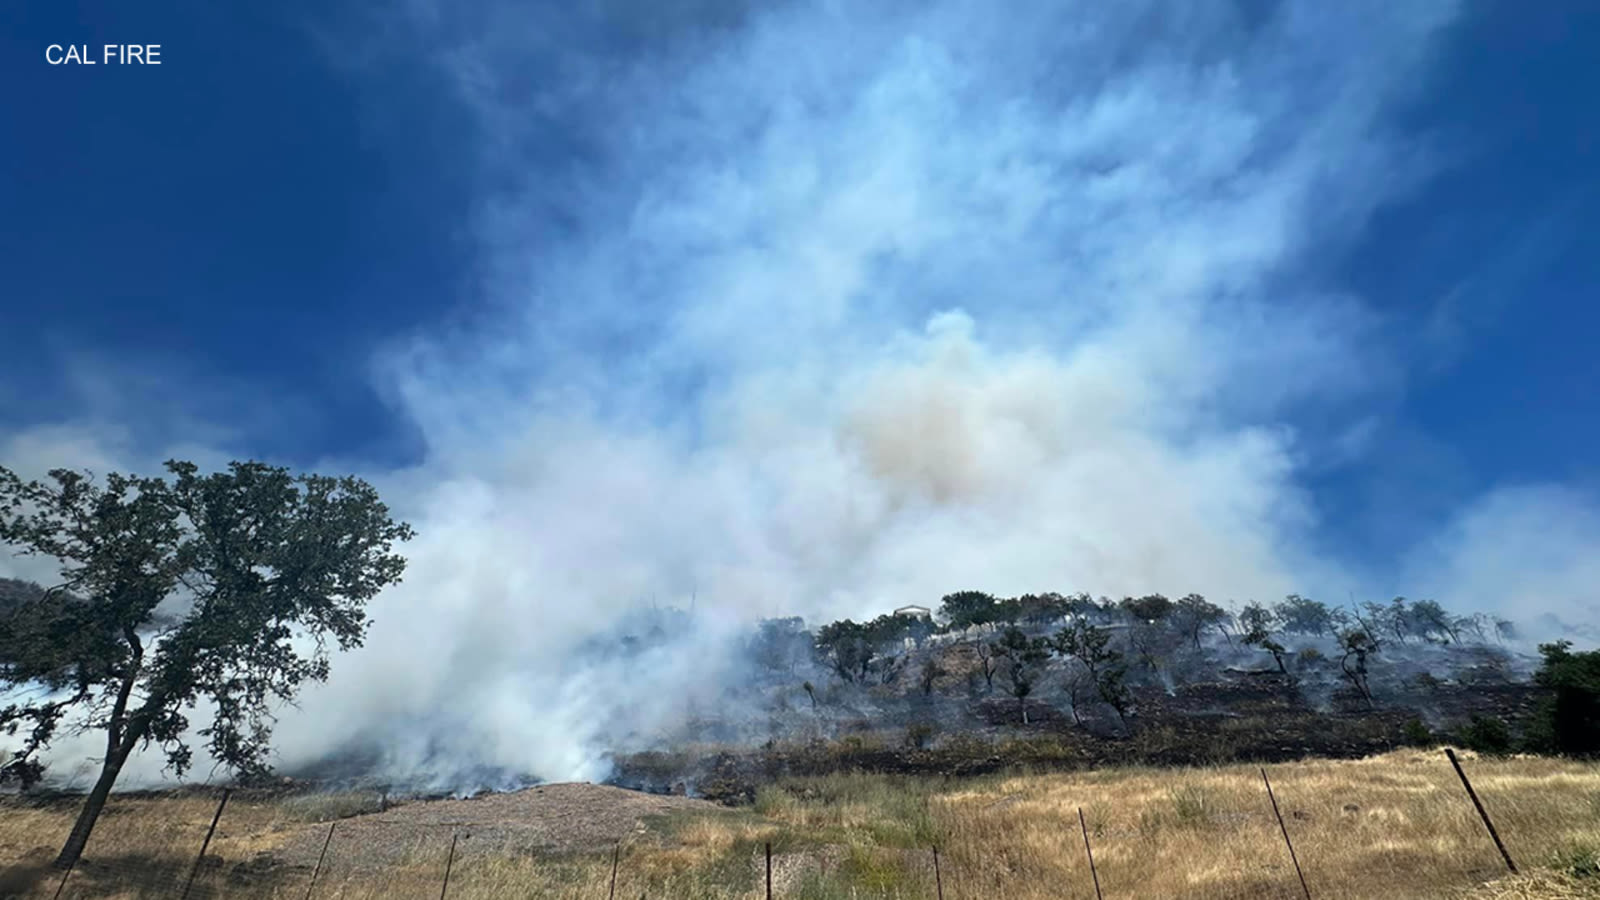 Crews battling fire that has burned at least 57 acres in St. Helena, CAL FIRE says